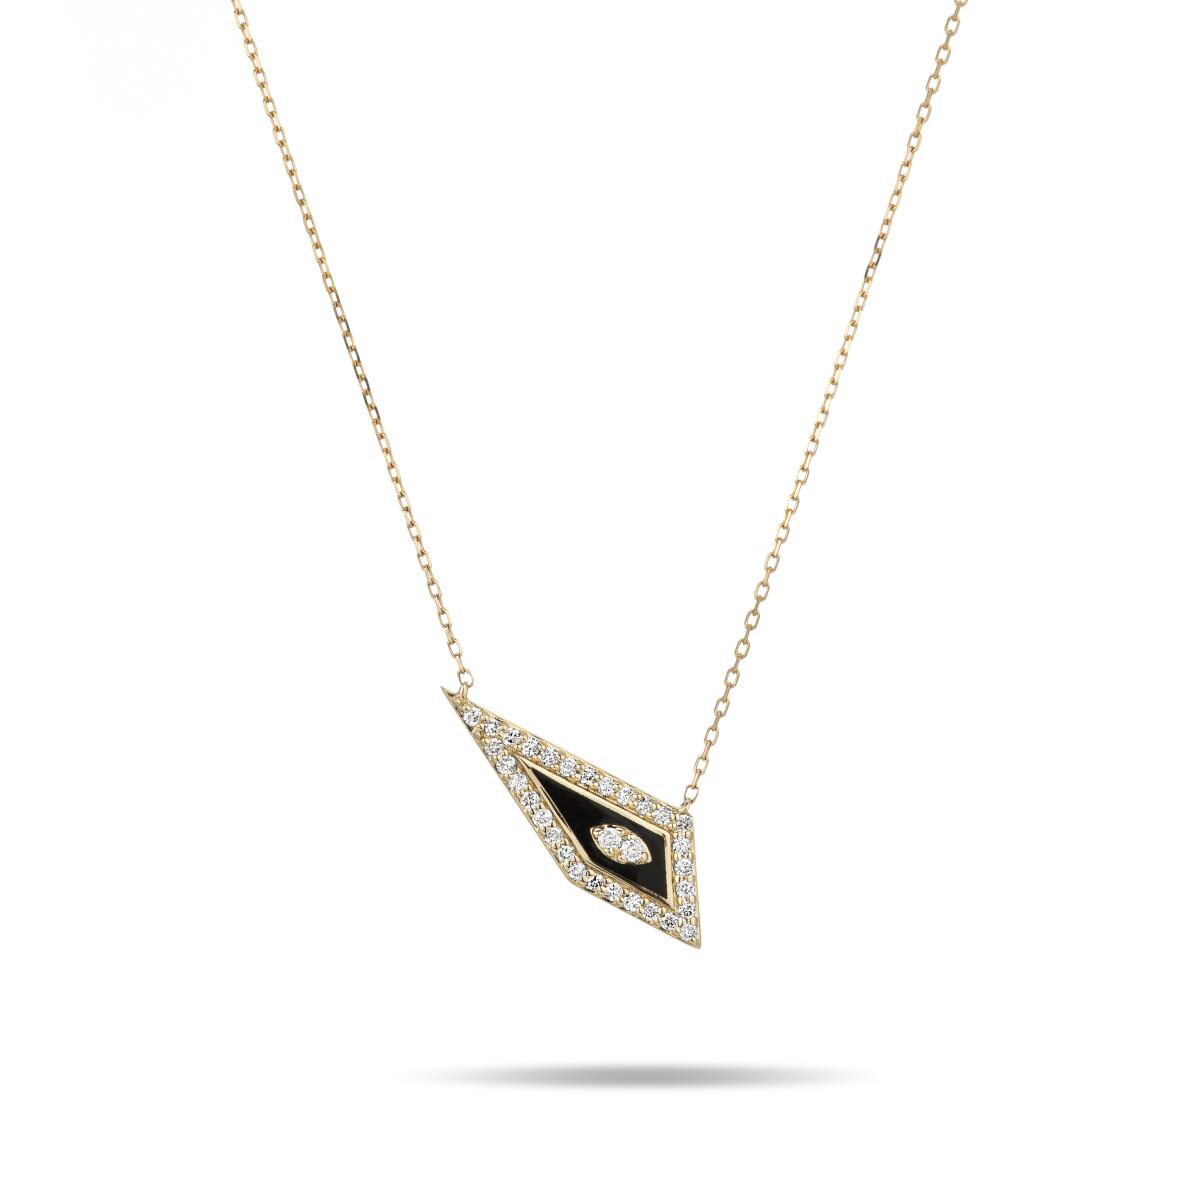 A mosaic pave marquise necklace set in 14k yellow gold